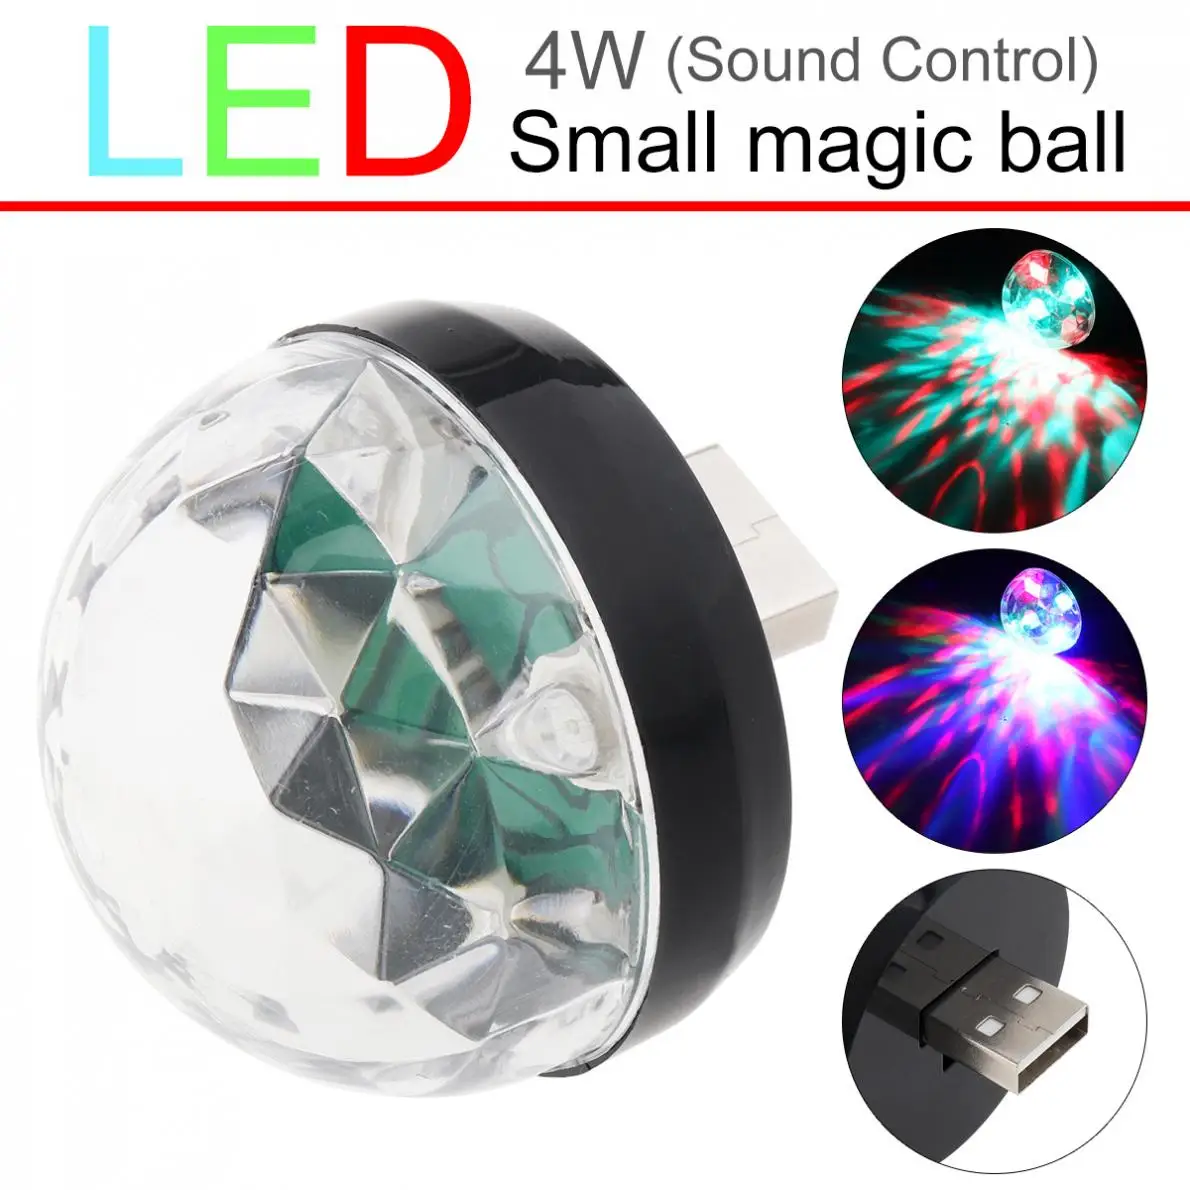 4W Mini USB LED Light Crystal Magic Ball RGB Colorful Stage Lights Decoration Lamp Lighting Effect for Home Car KTV Stage